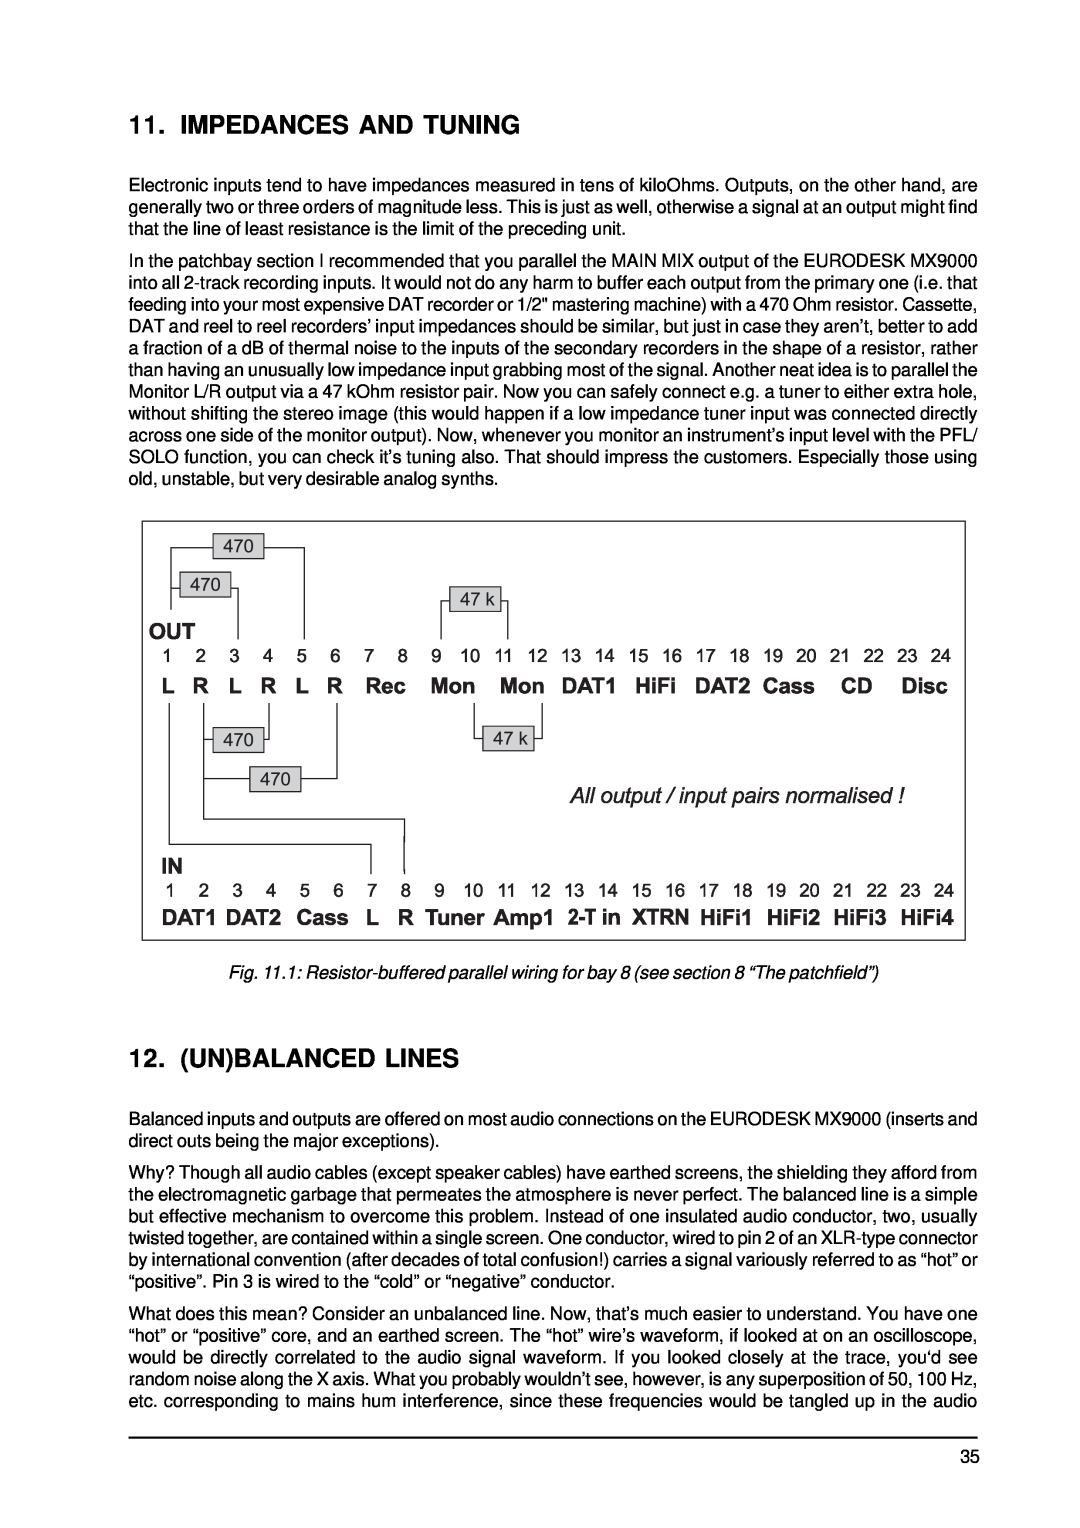 Behringer MX9000 user manual Impedances And Tuning, Unbalanced Lines 